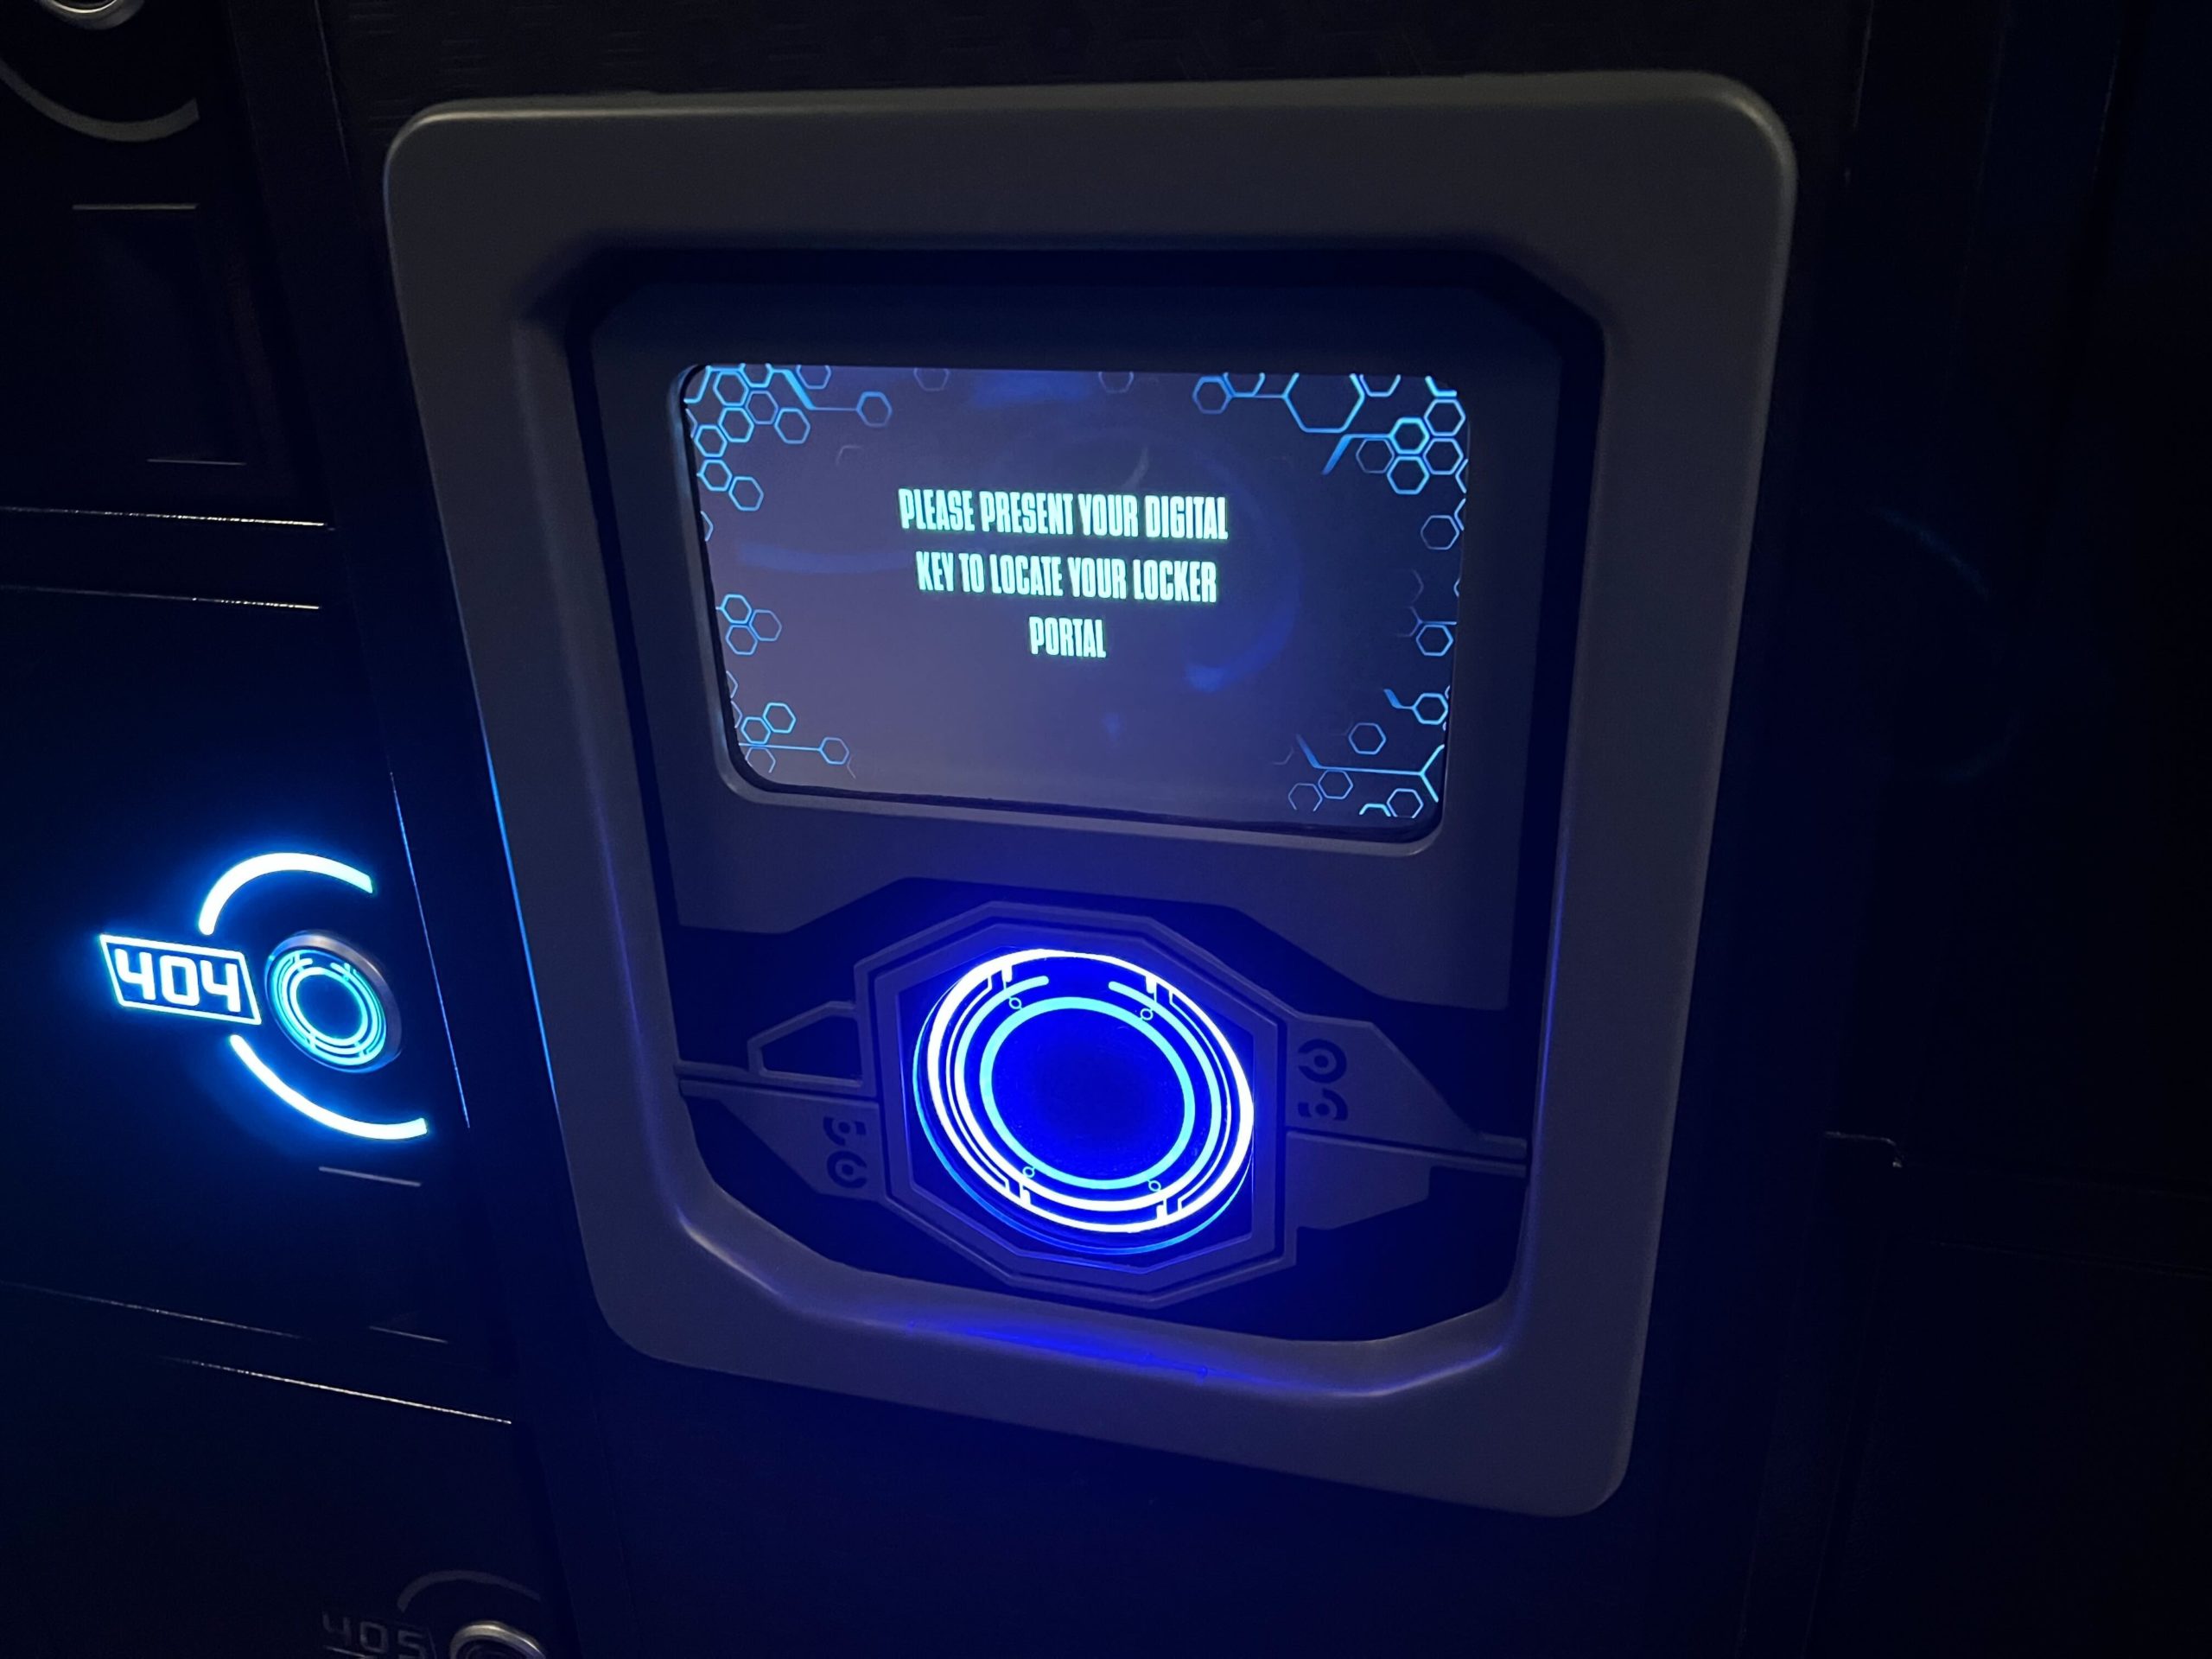 New bin for locker cards and identity disk for photopass at Tron Lightcyle / Run